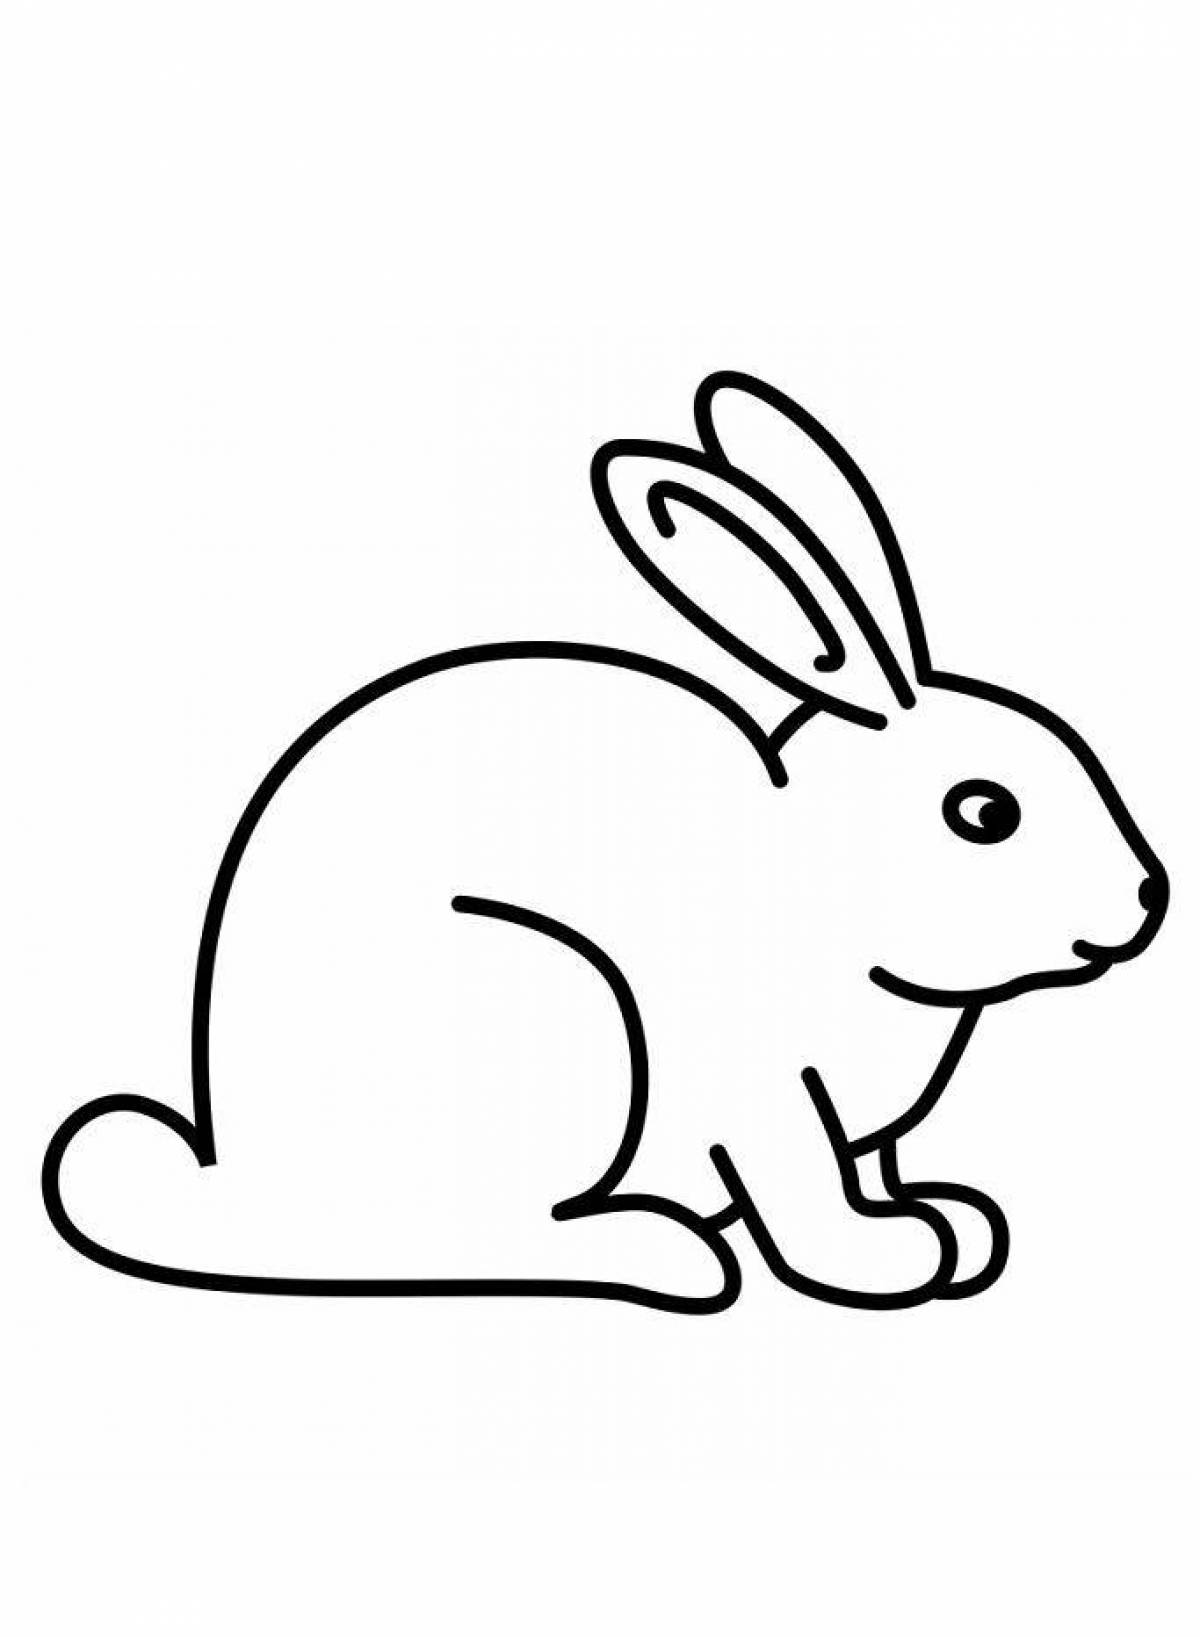 Happy coloring page bunny for kids